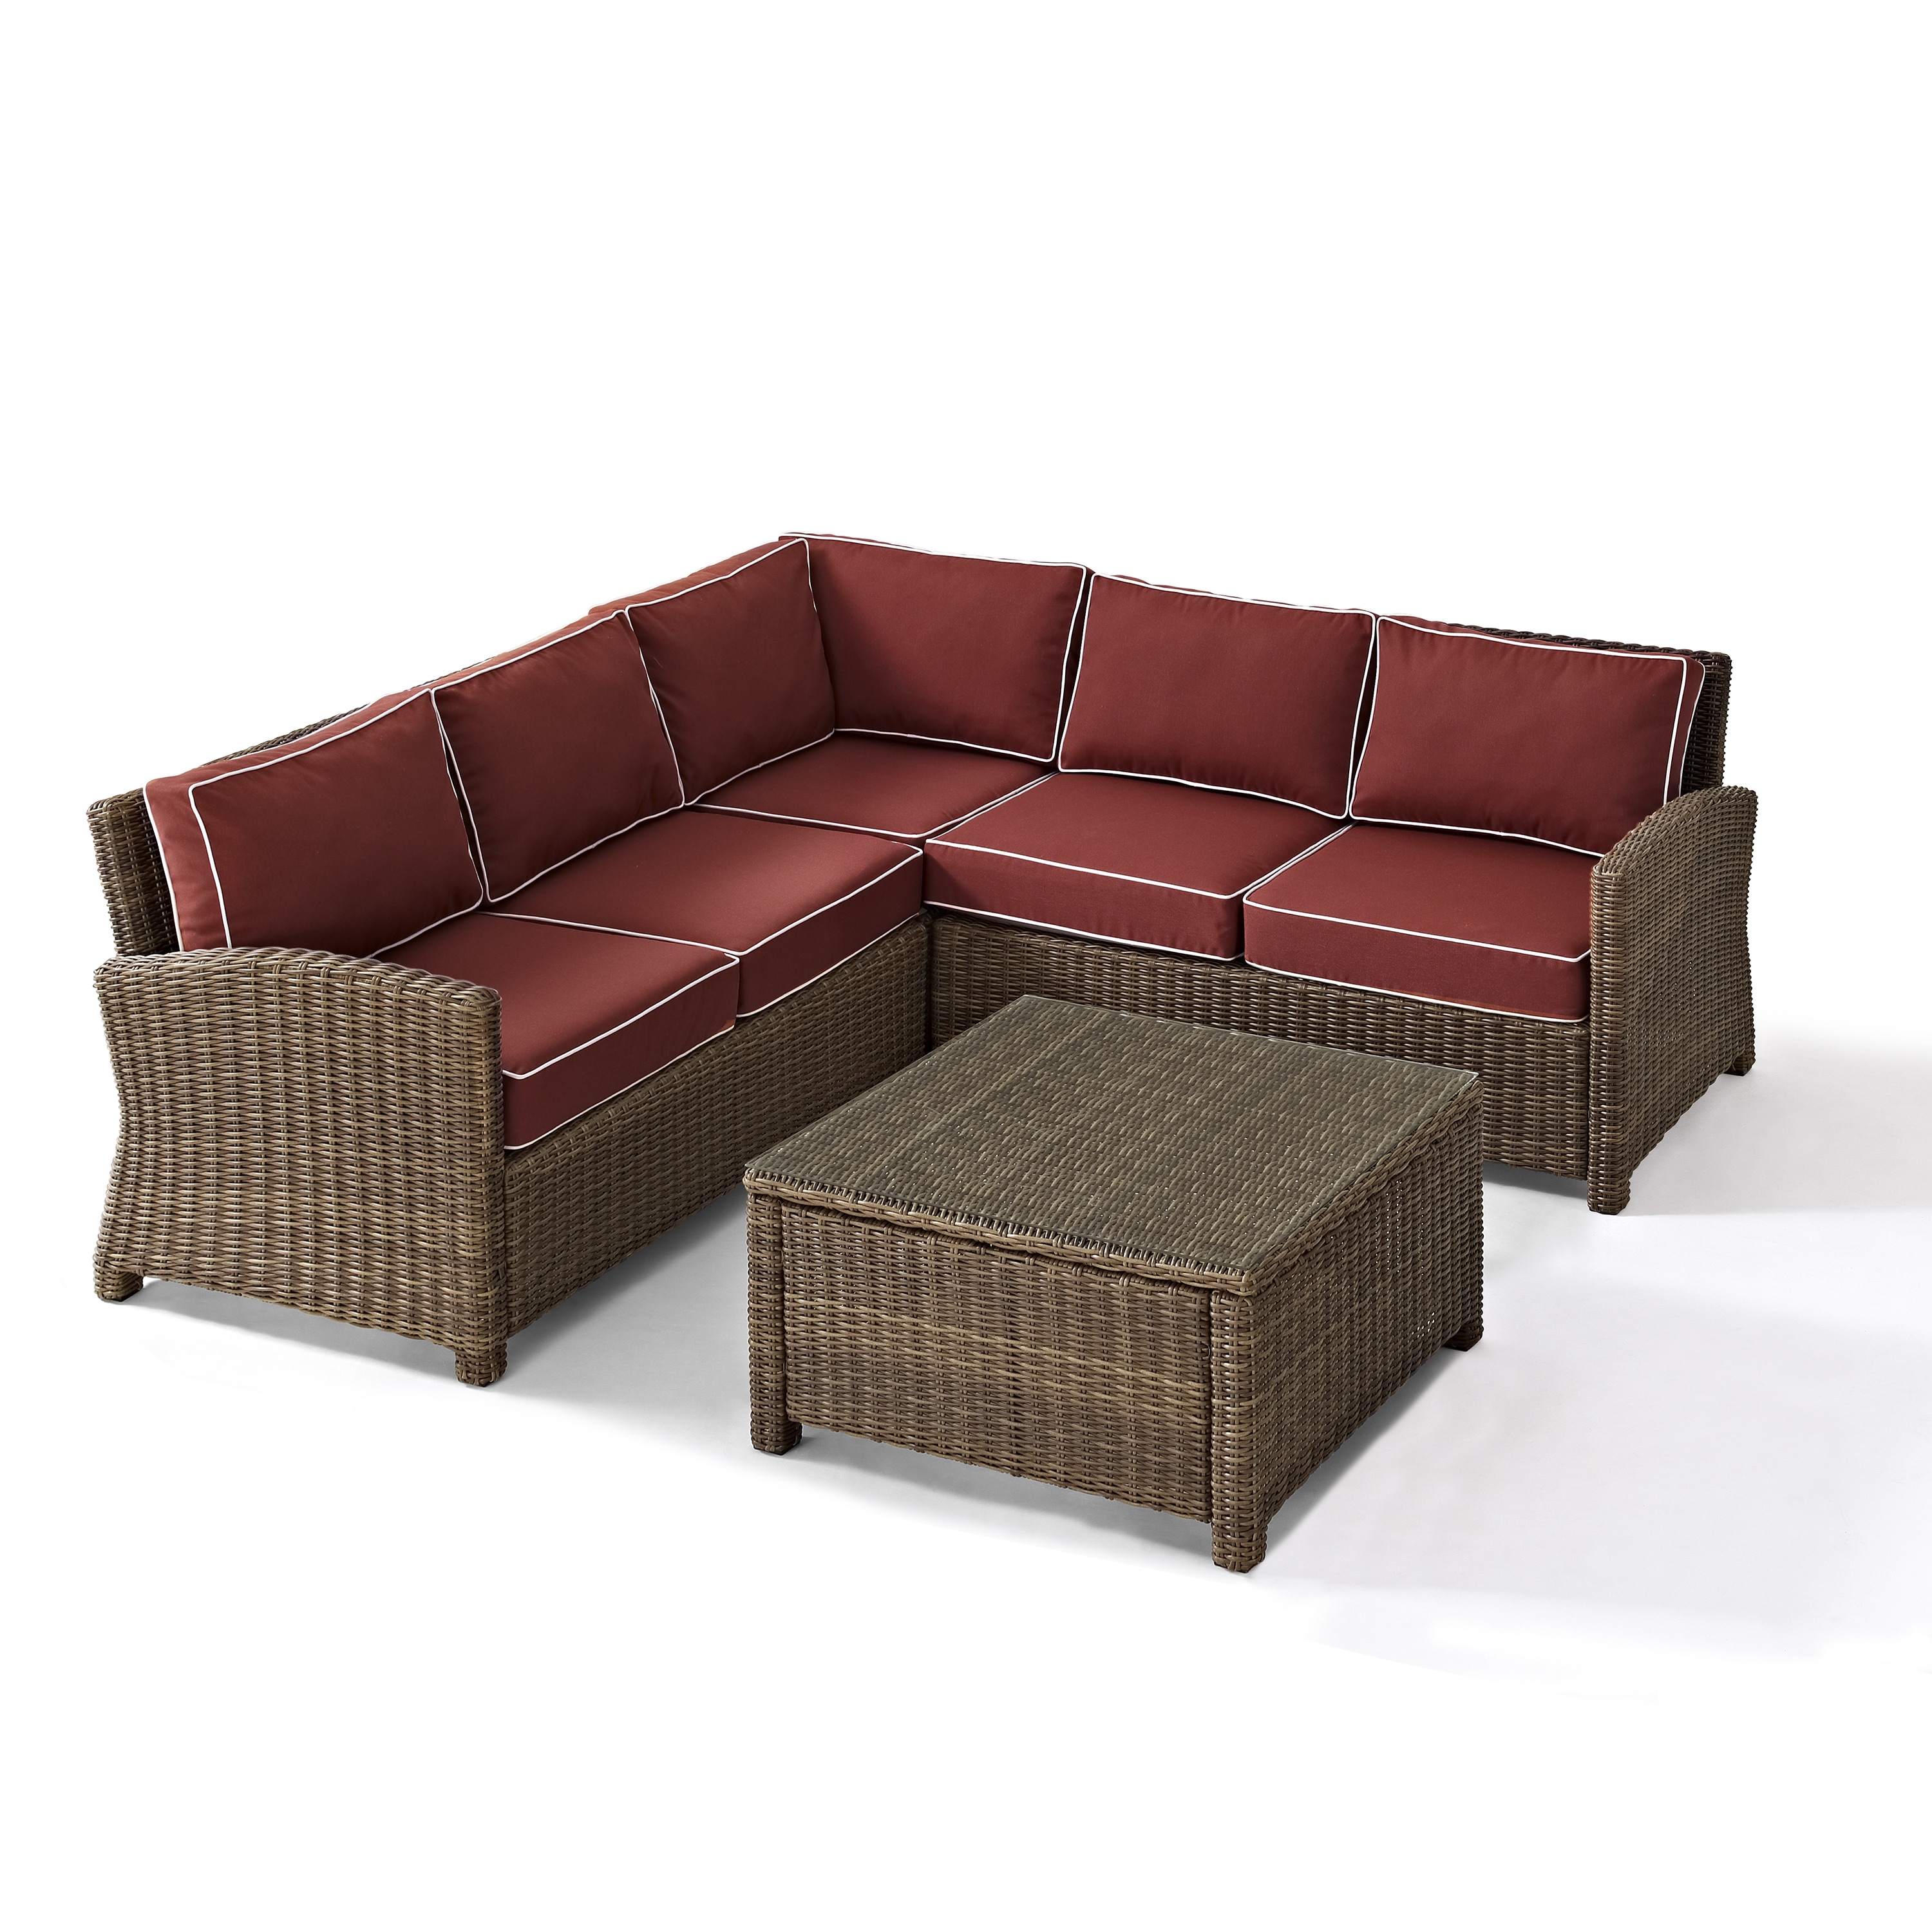 Bradenton Outdoor Wicker 4-piece Sectional Seating Set With Sangria Cushions